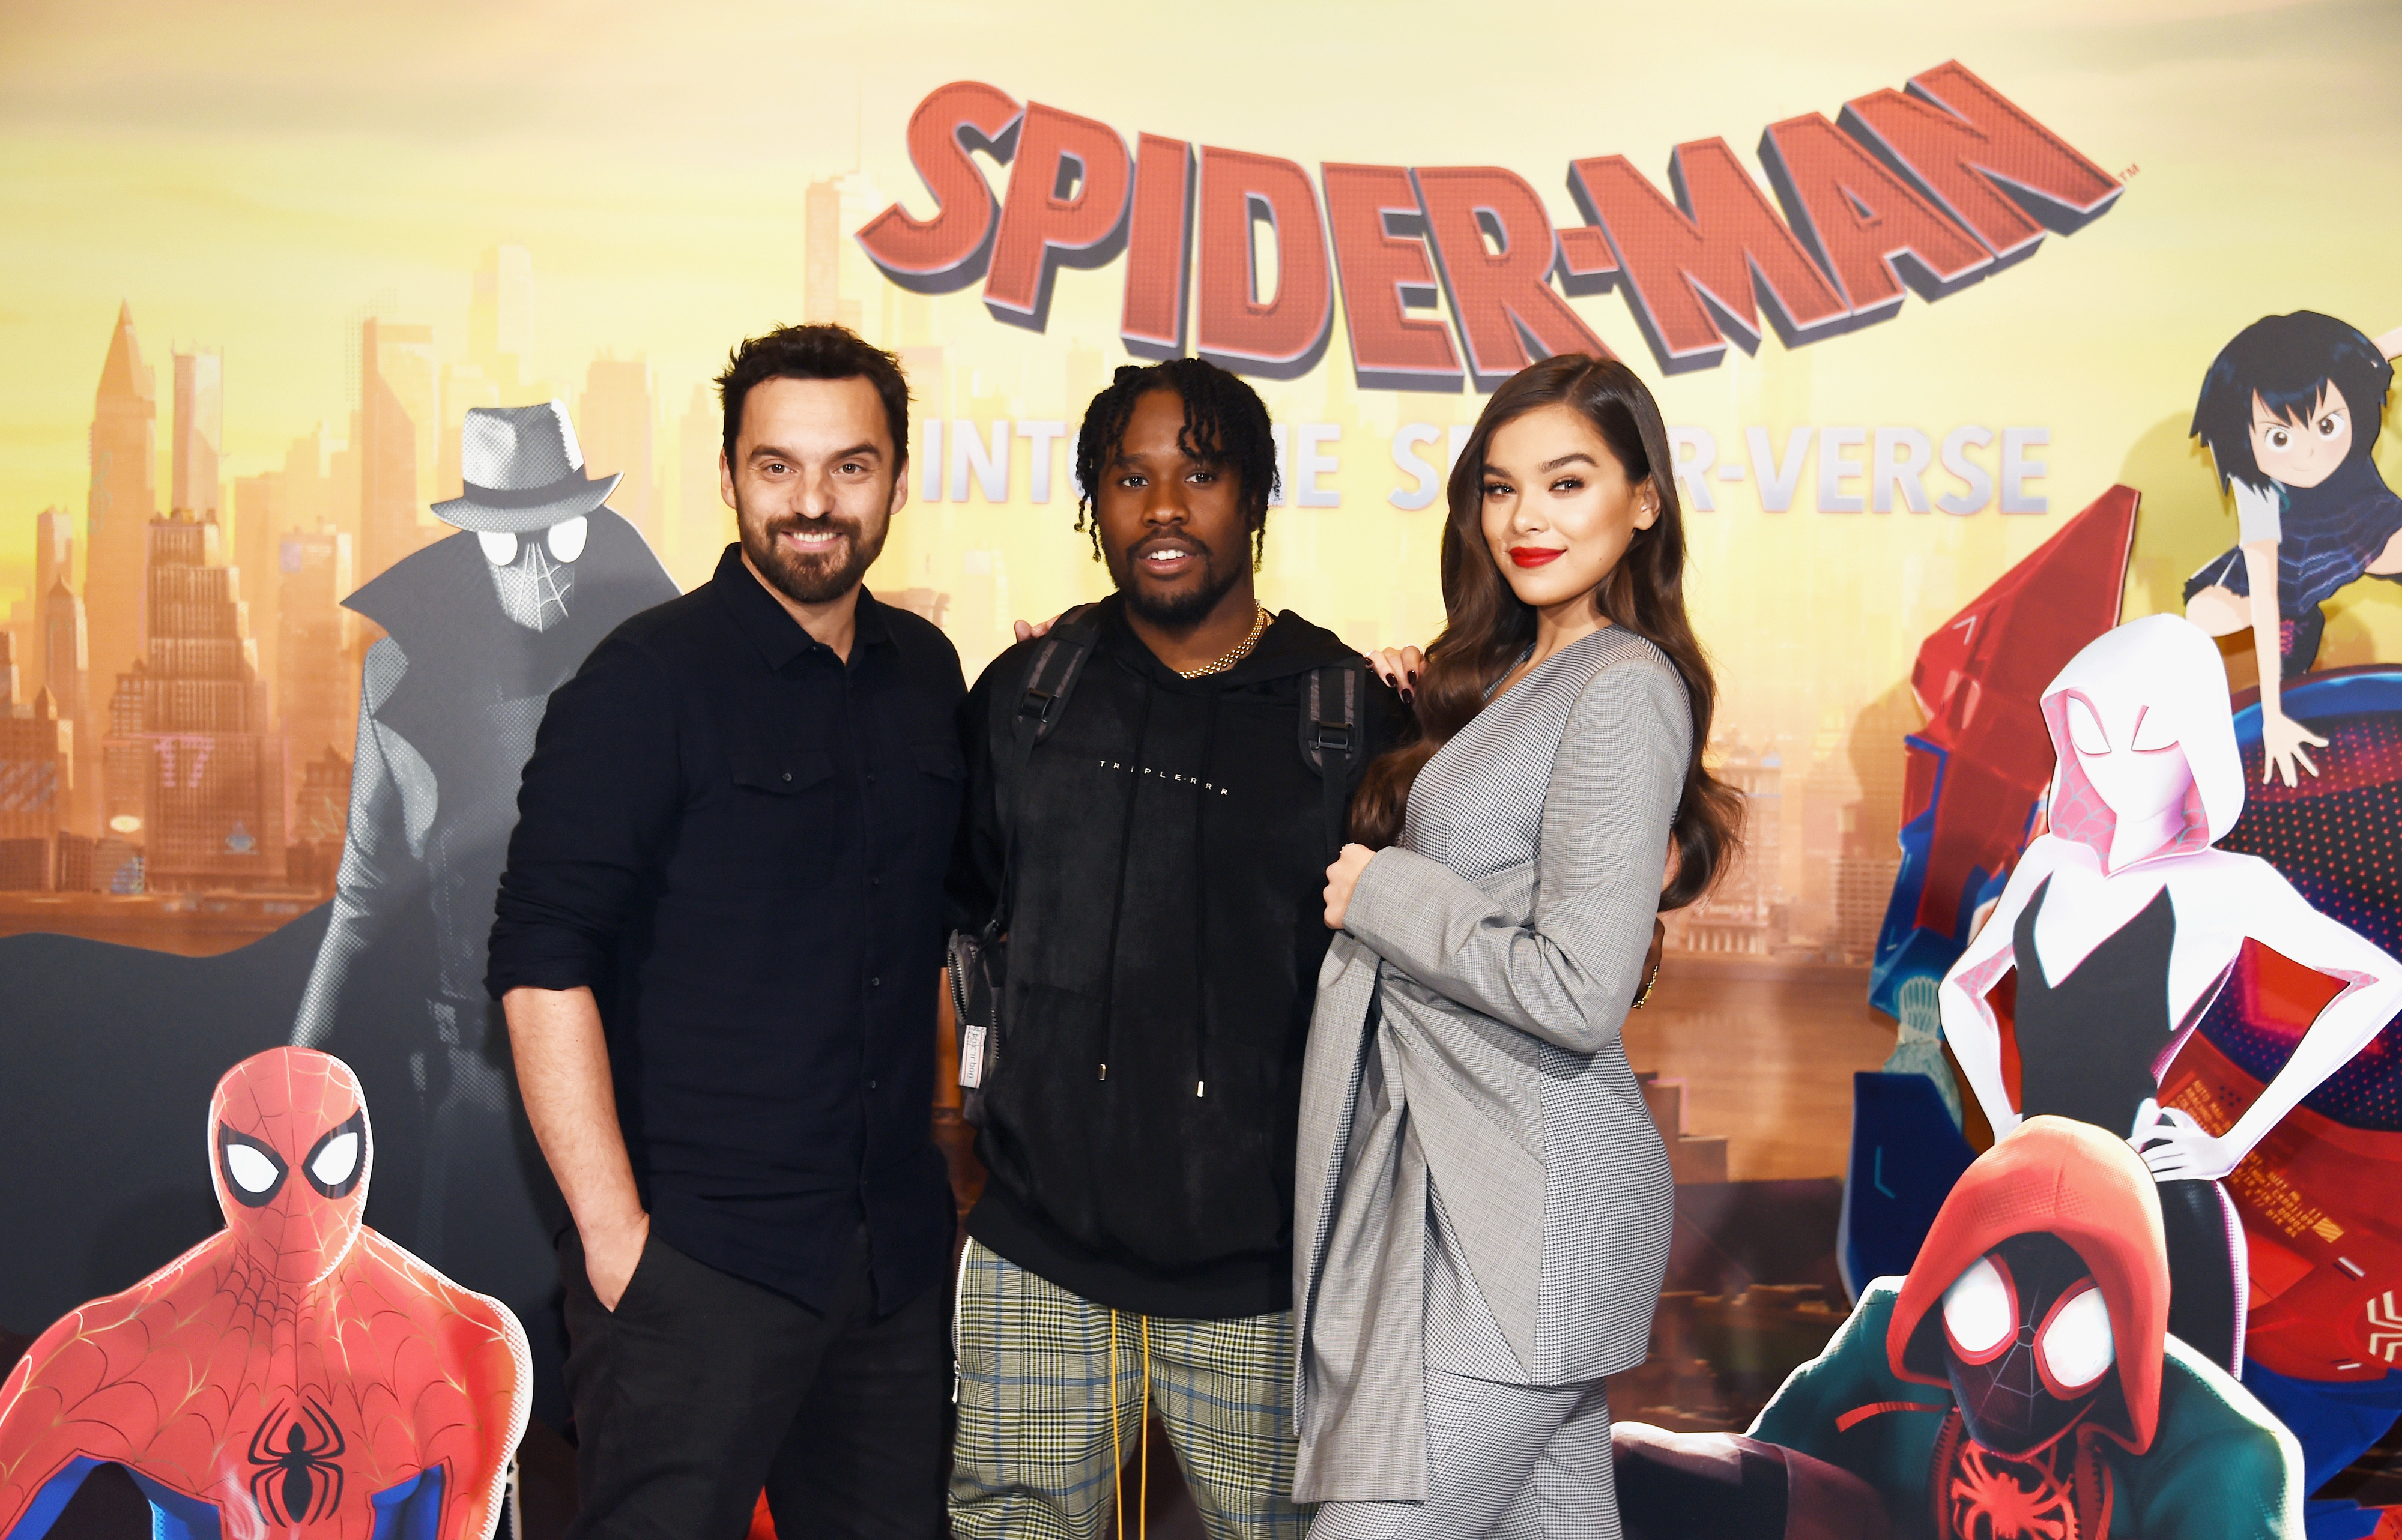 Jake Johnson, Shameik Moore, and Hailee Steinfeld from Spider-Man: Into the Spider-Verse standing together